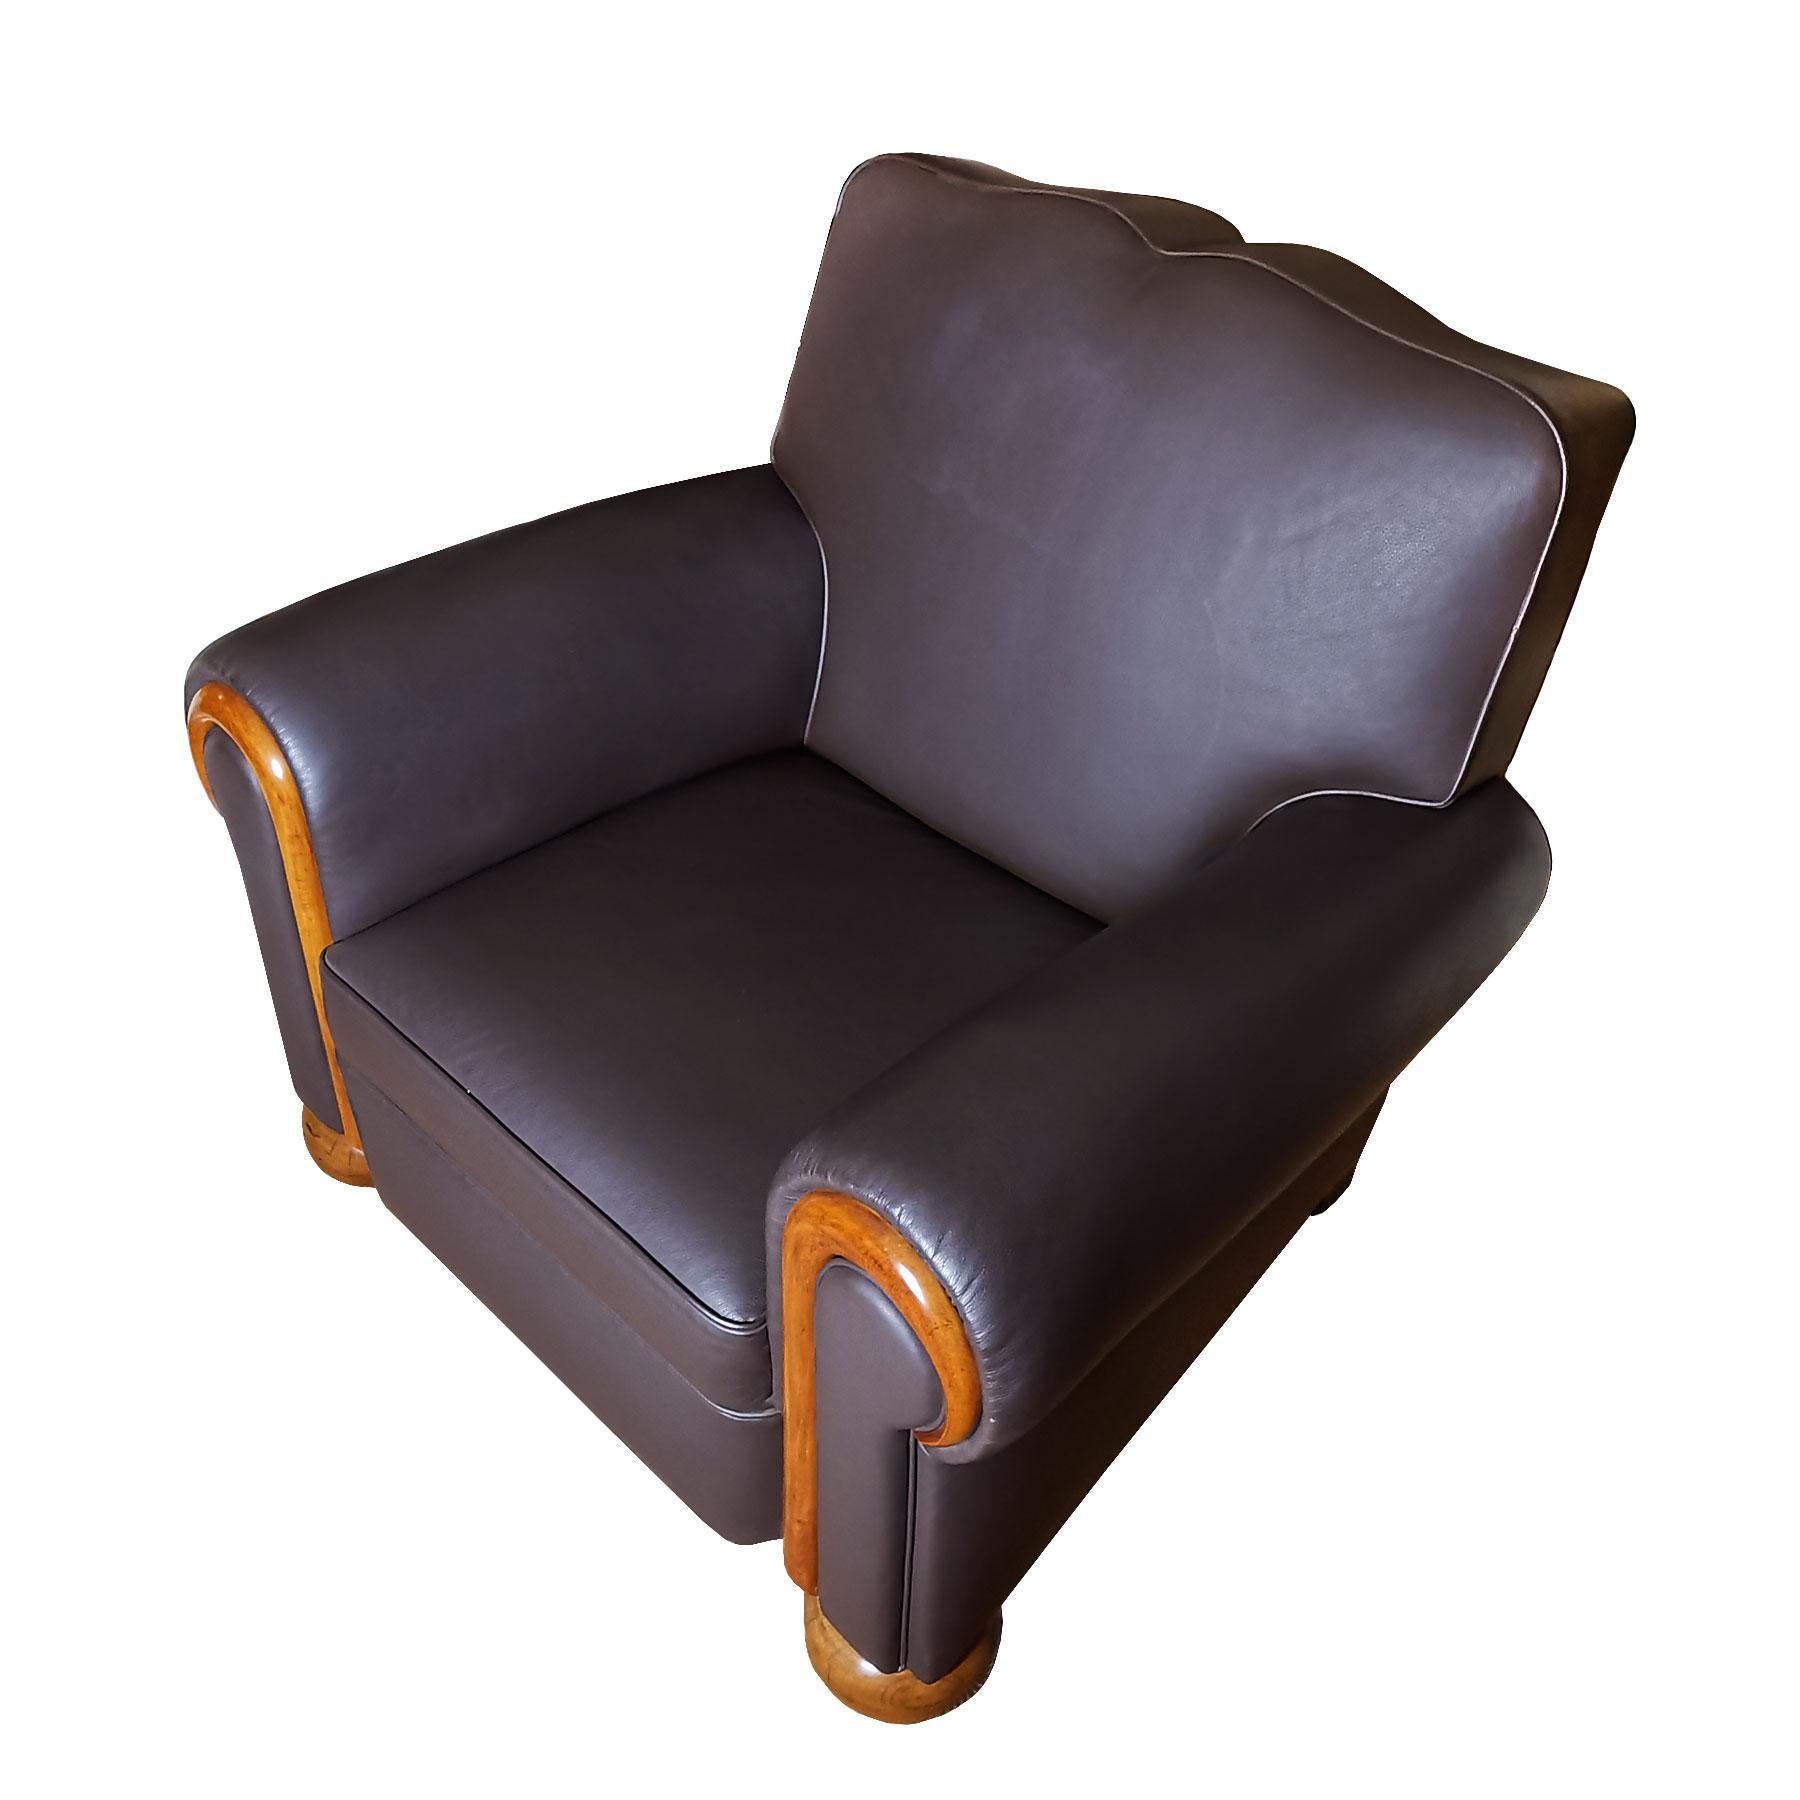 Big Mid-Century Modern Club Armchair, Wood and Chocolate Leather - Belgium For Sale 1